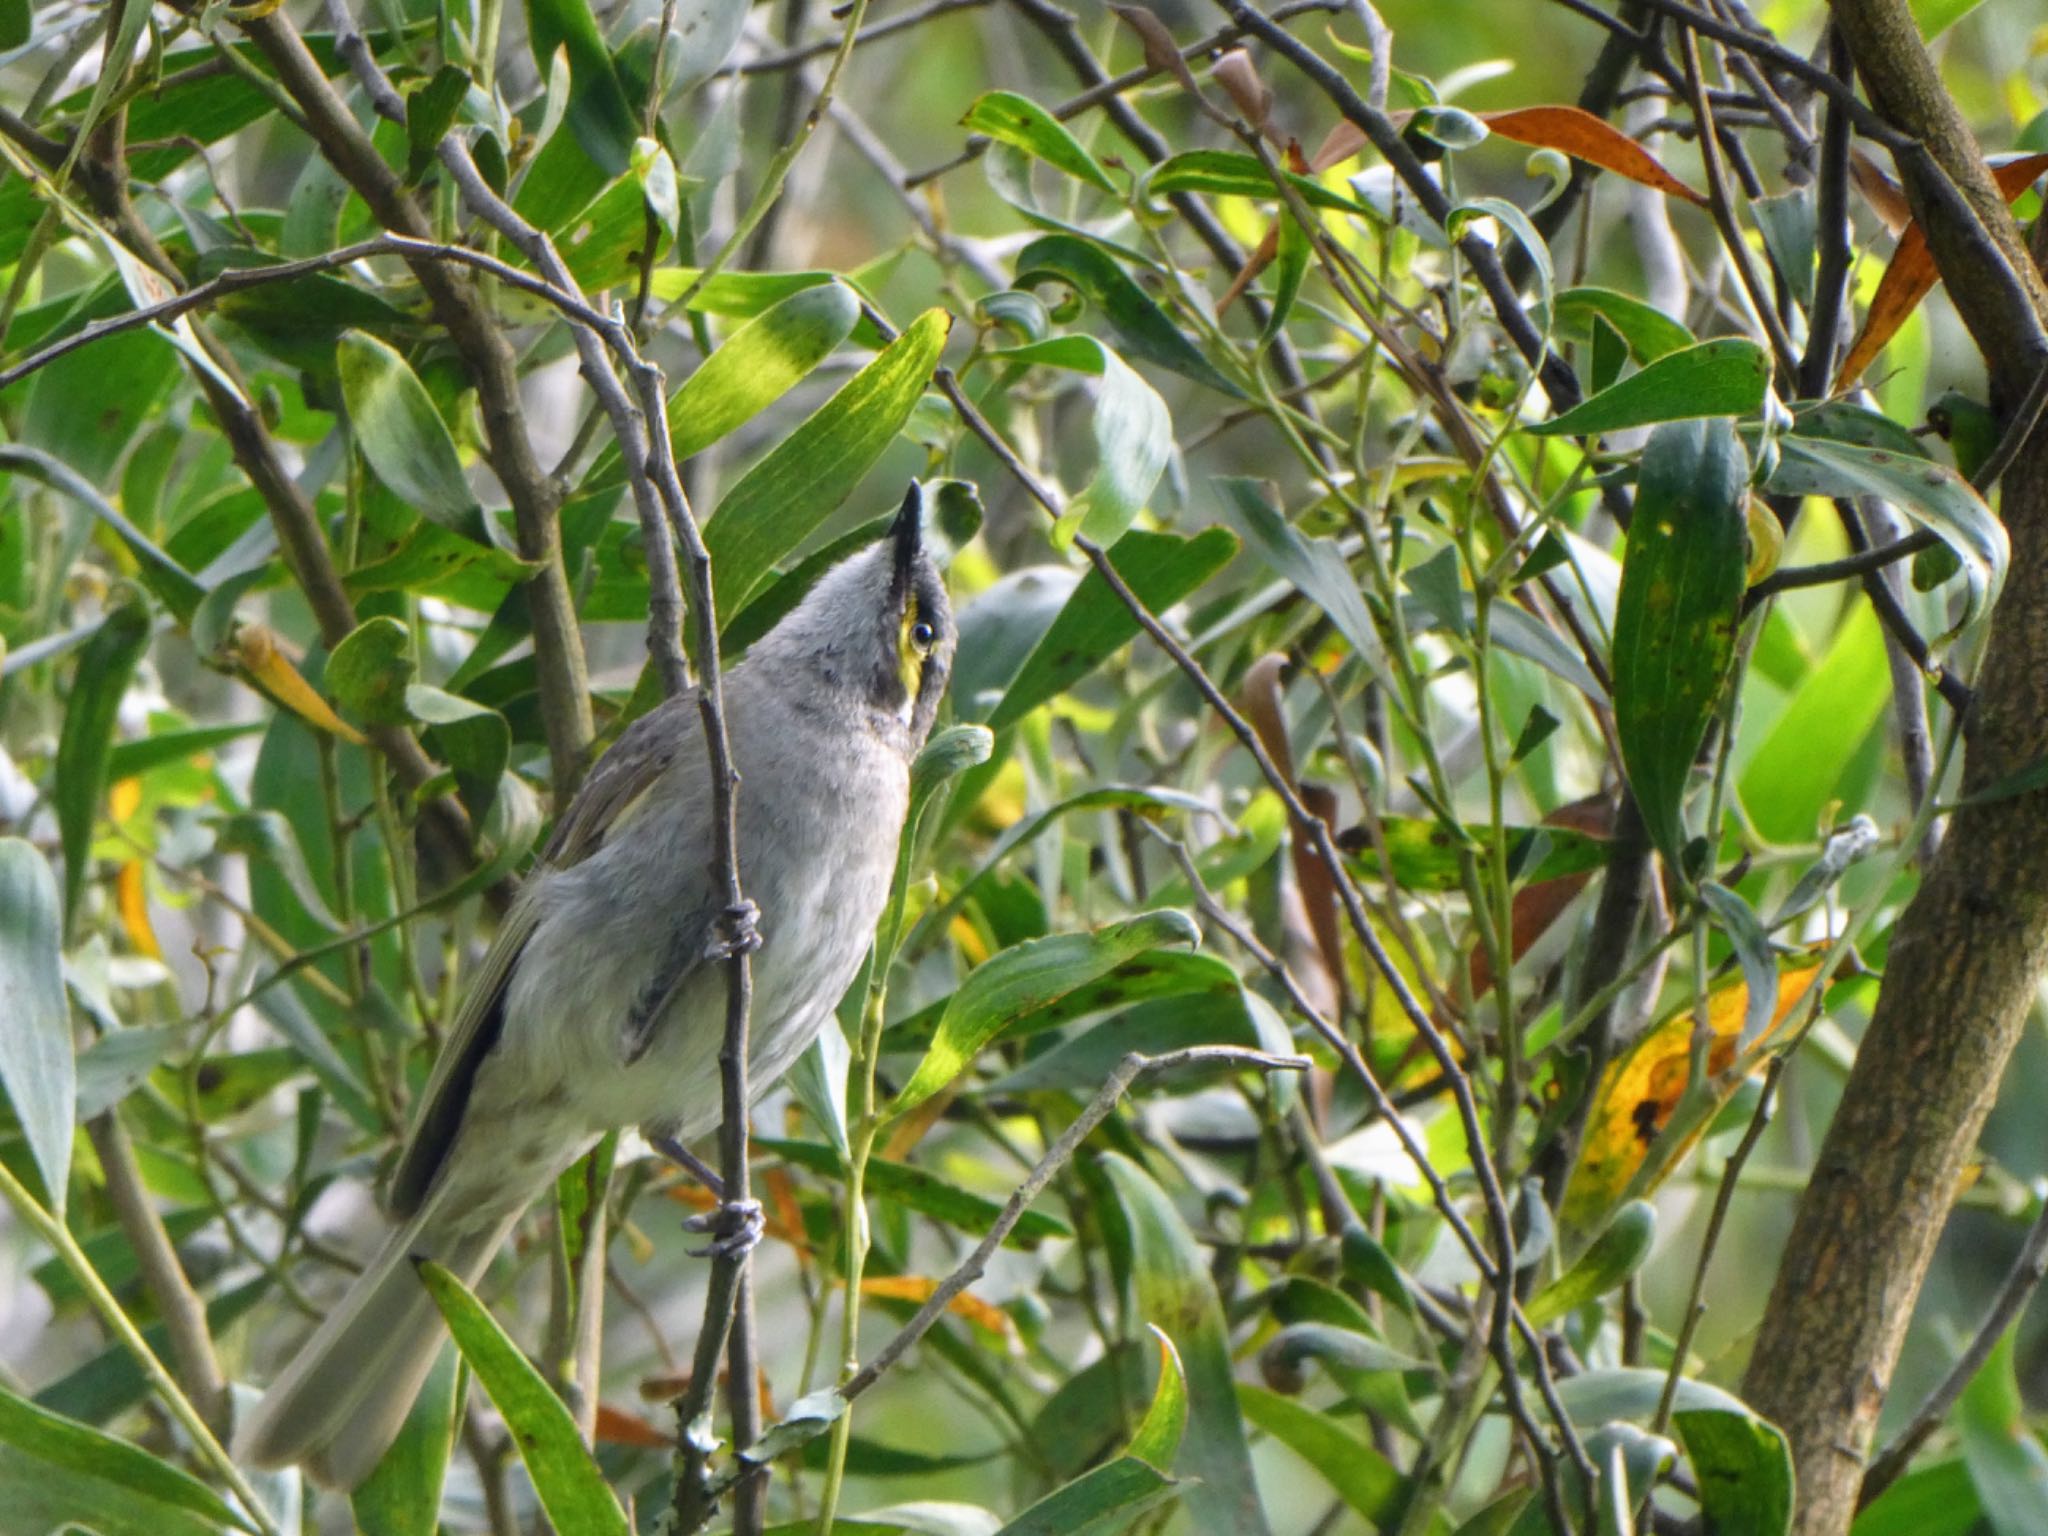 Photo of Yellow-faced Honeyeater at Cecil Hoskins Nature Reserve, Moss Vale, NSW, AUSTRALIA by Maki